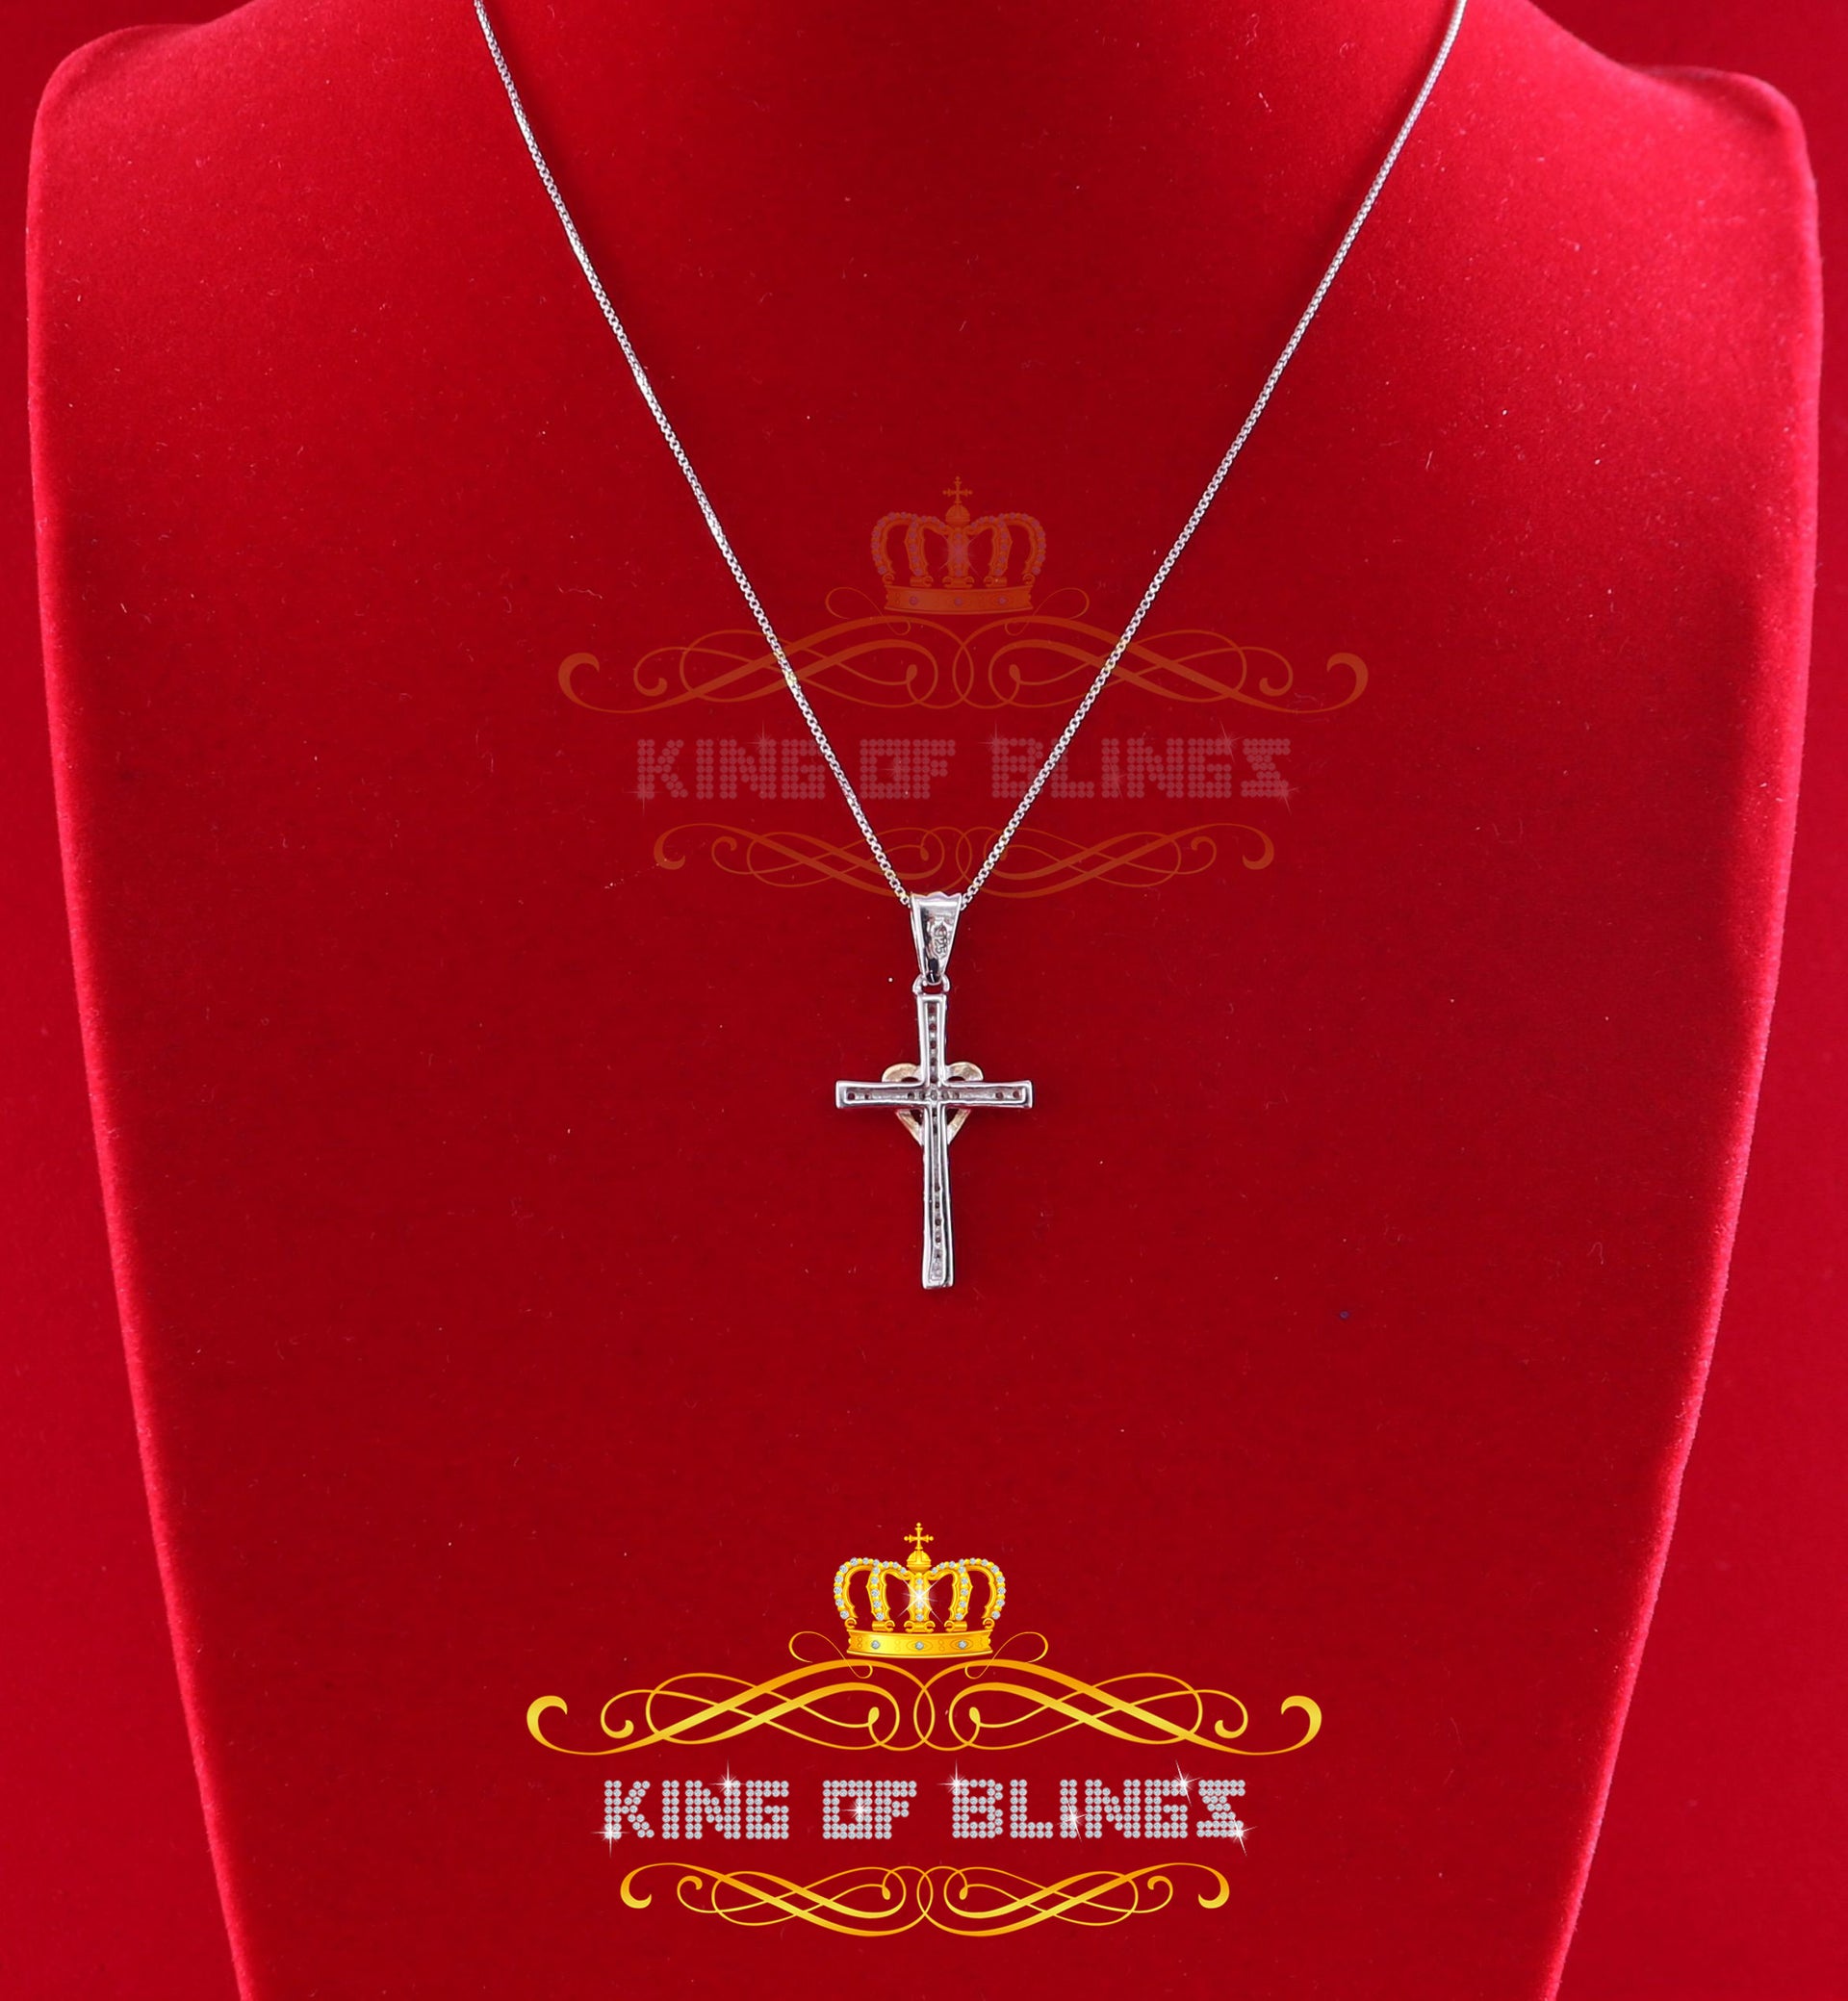 King Of Bling's White 925 Sterling Silver Cross with Heart Pendant with 0.22ct Cubic Zirconia KING OF BLINGS